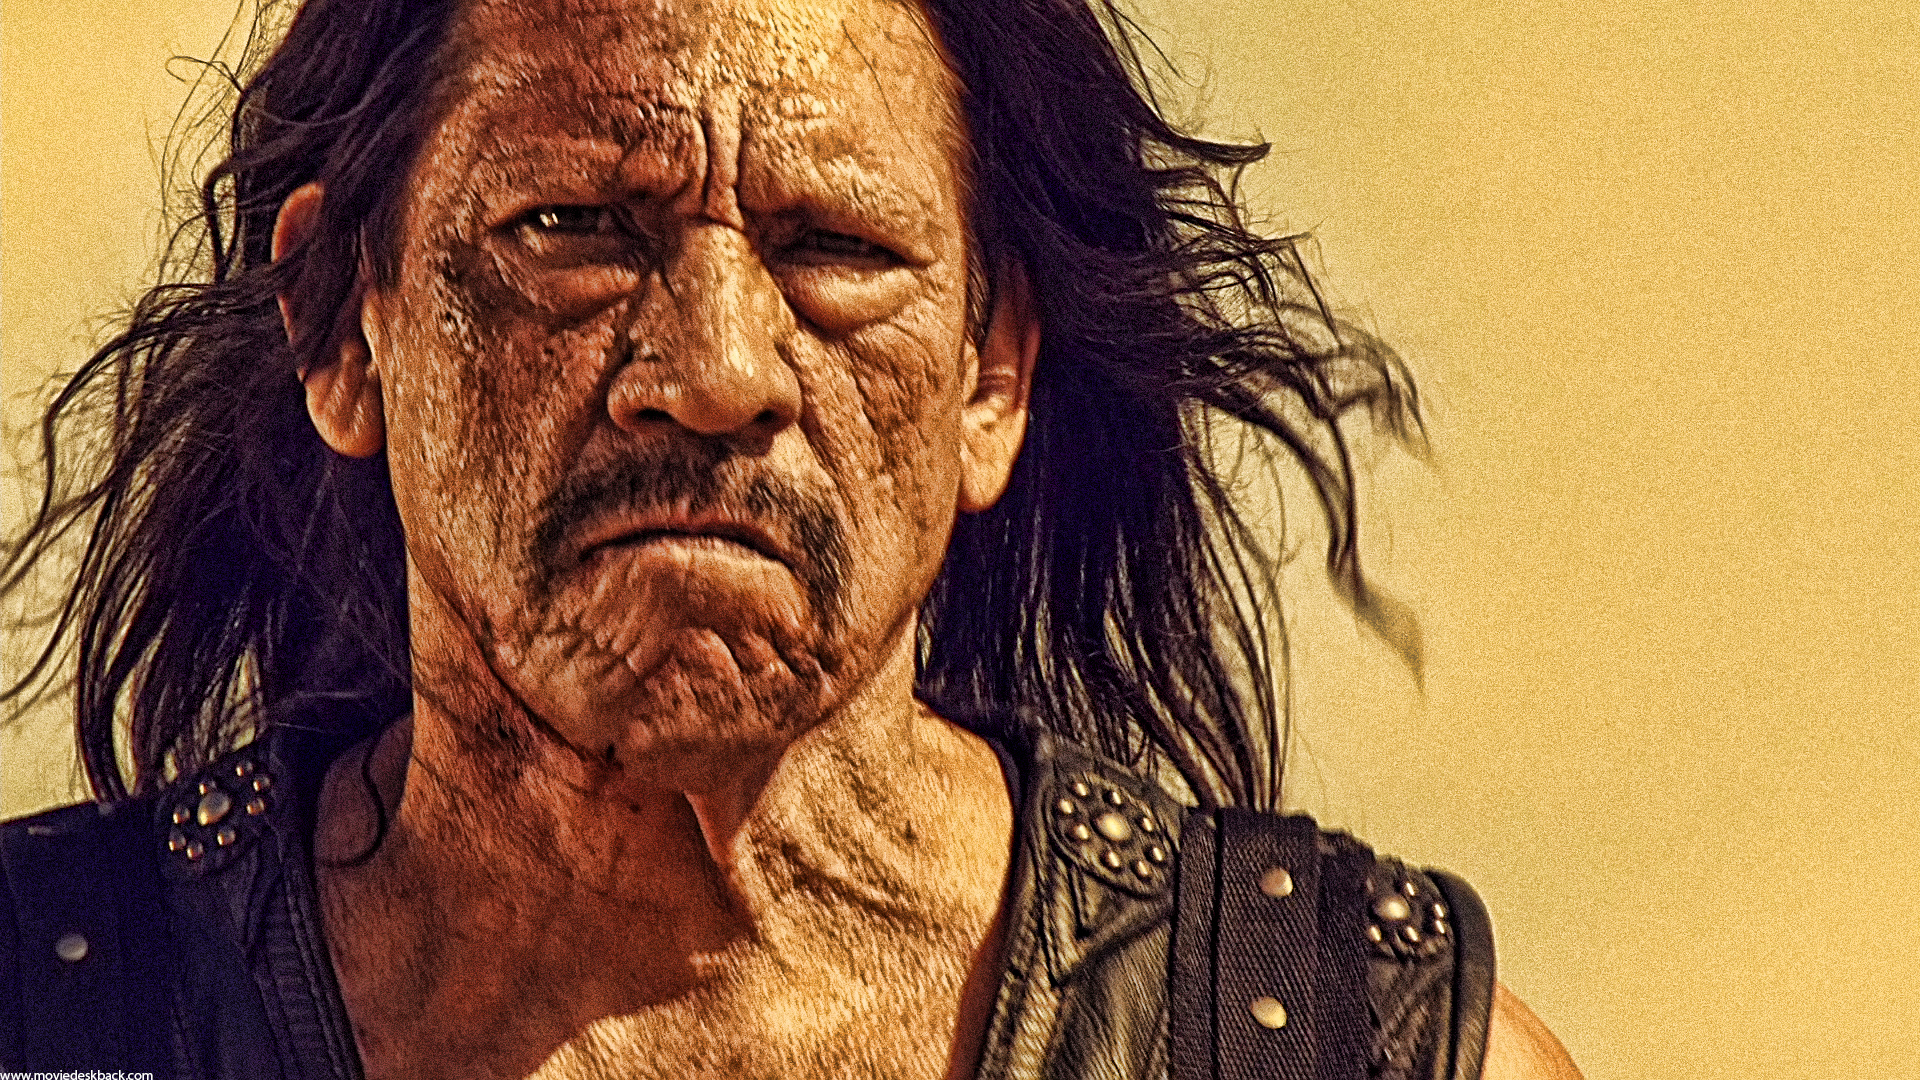 Three Years After The First Machete Movie We Get Sequel From A